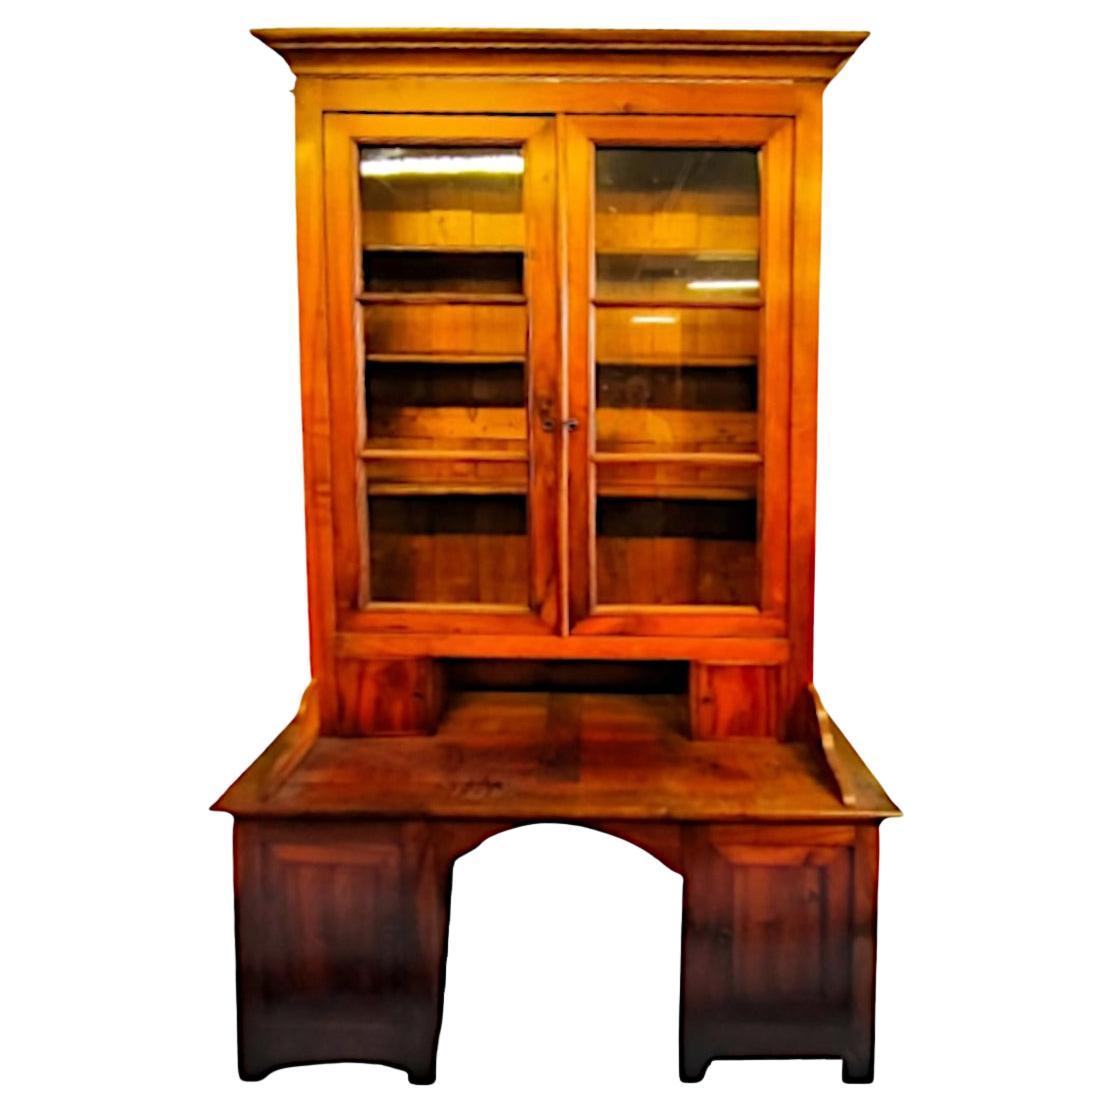 Bookcase with Display Case and Writing Surface Made of Solid Walnut from 1800s